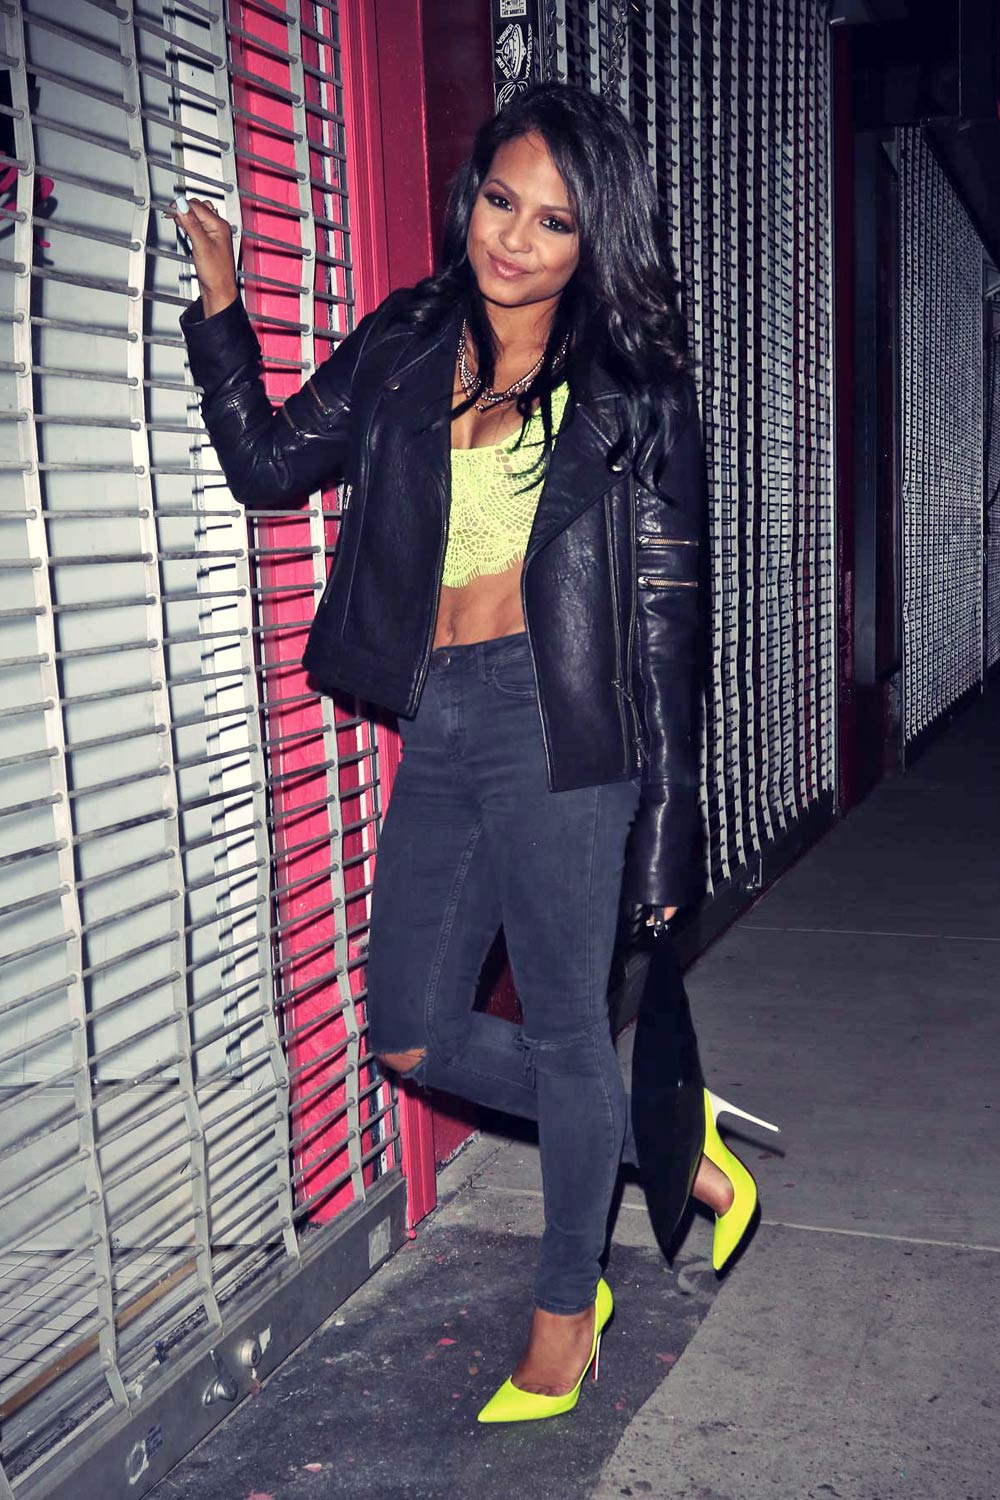 Christina Milian at her We Are Pop Culture pop up shop